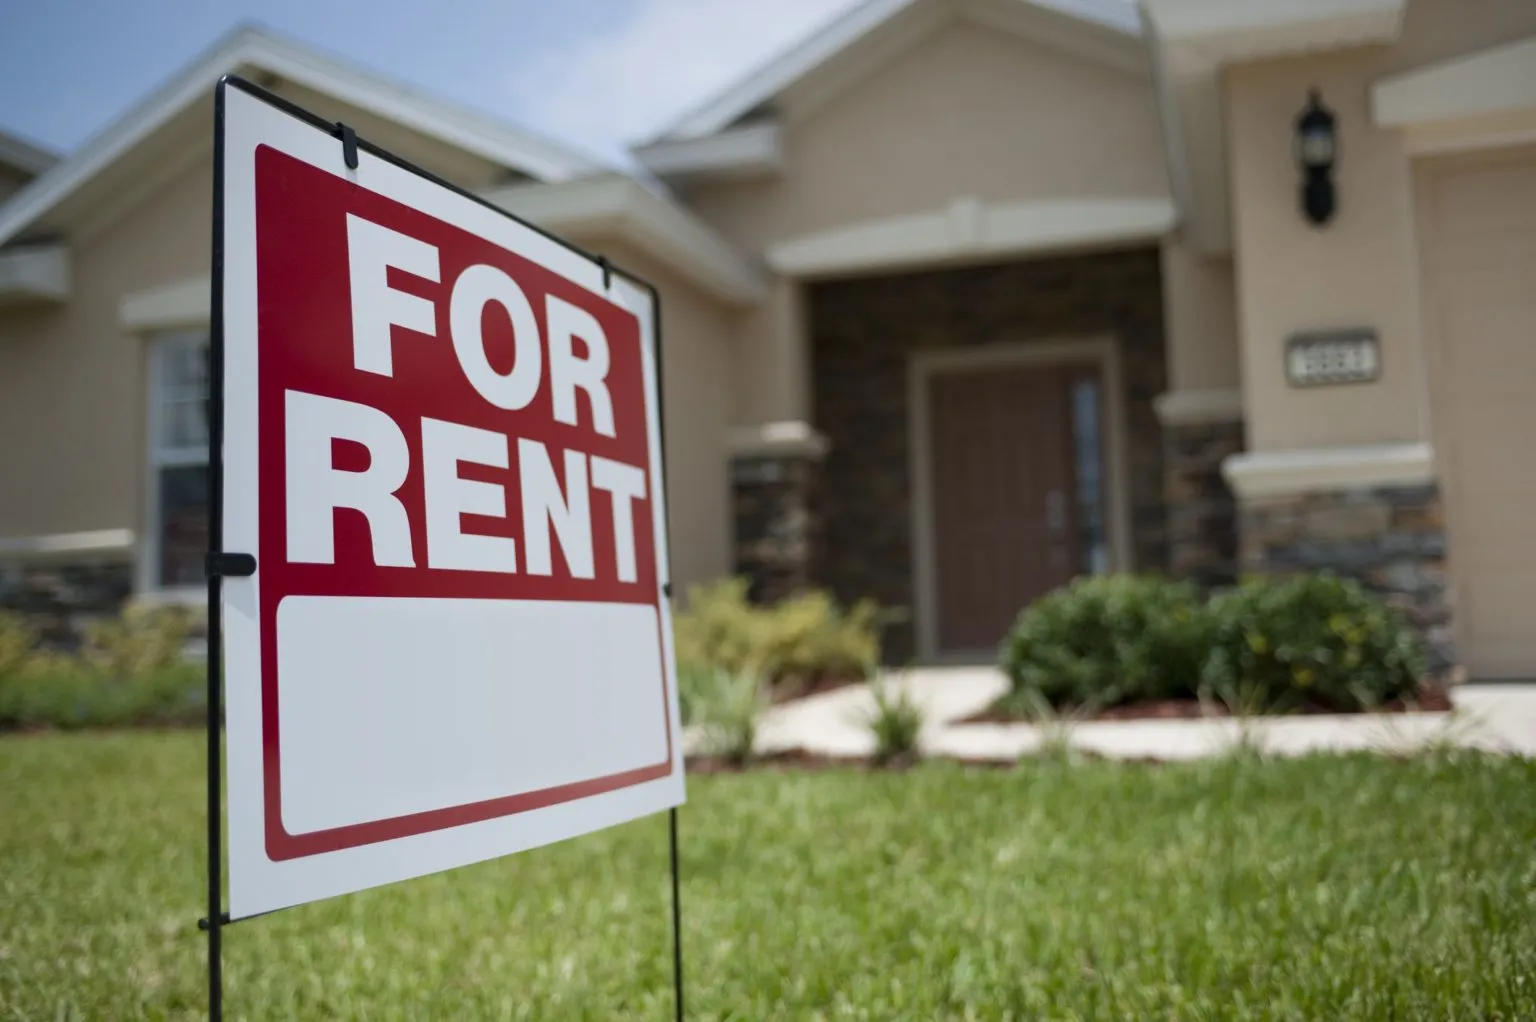 Oregon lawmakers approved a bill Saturday to cap the amount landlords can increase rent on existing tenants to no more than 10% a year, sending it to Gov. Tina Kotek for final approval.